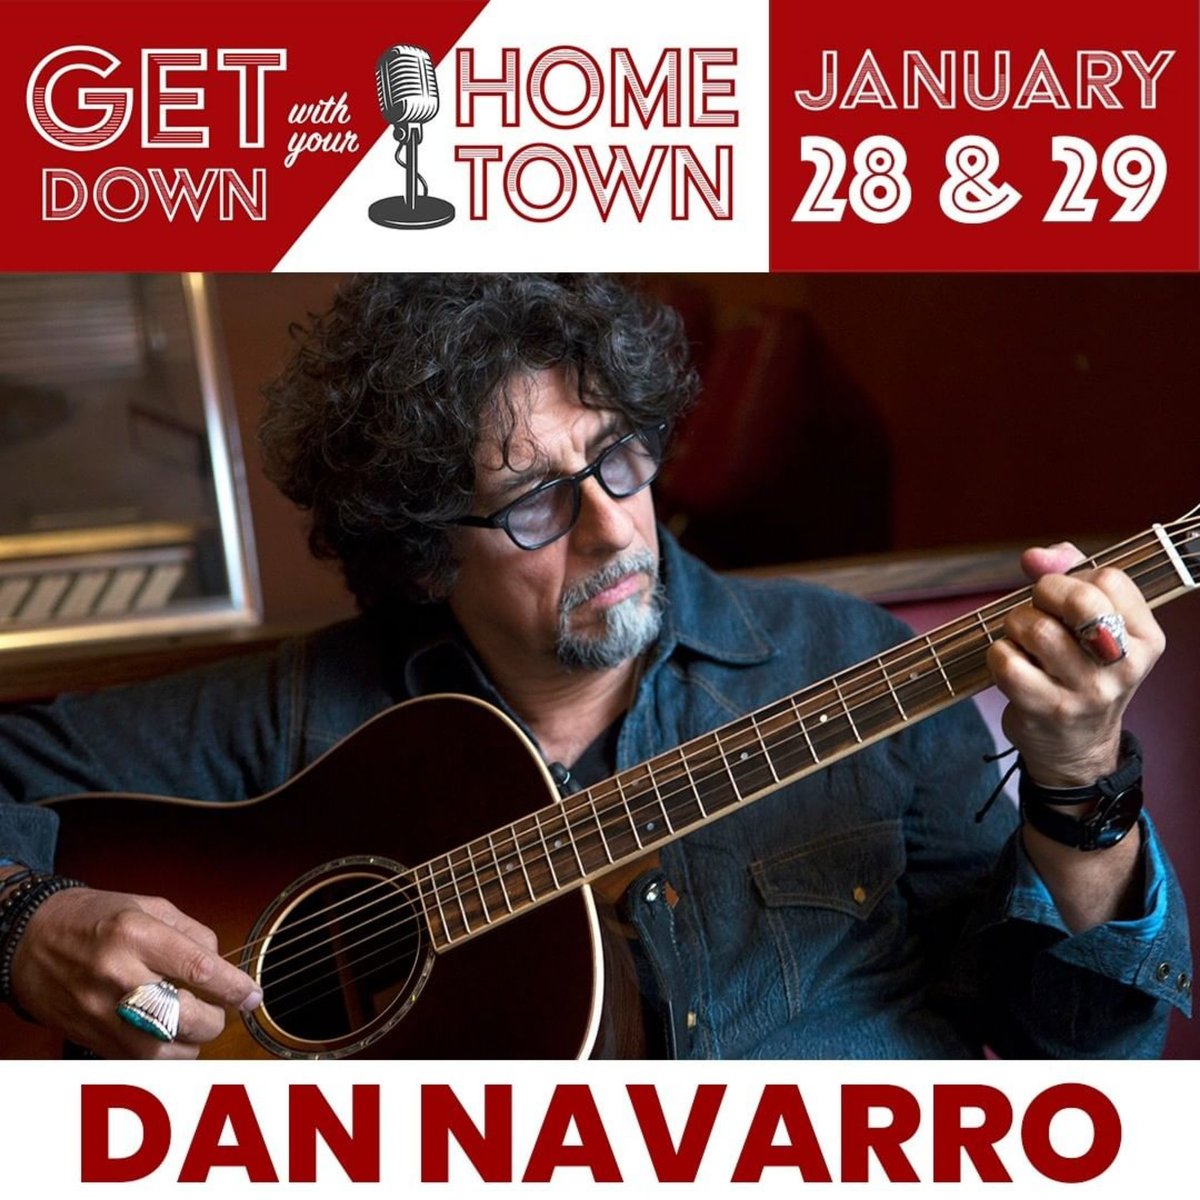 #Repost @getdownhometown
・・・
Join us January 28 & 29 to get down with @dannavarromusic! Link in Story! 

#gdht #free #virtualconcert #virtualfestival #music #tunein #joinus #explorepage #showtime #concert #live #singersongwriter #acousticguitar #americana